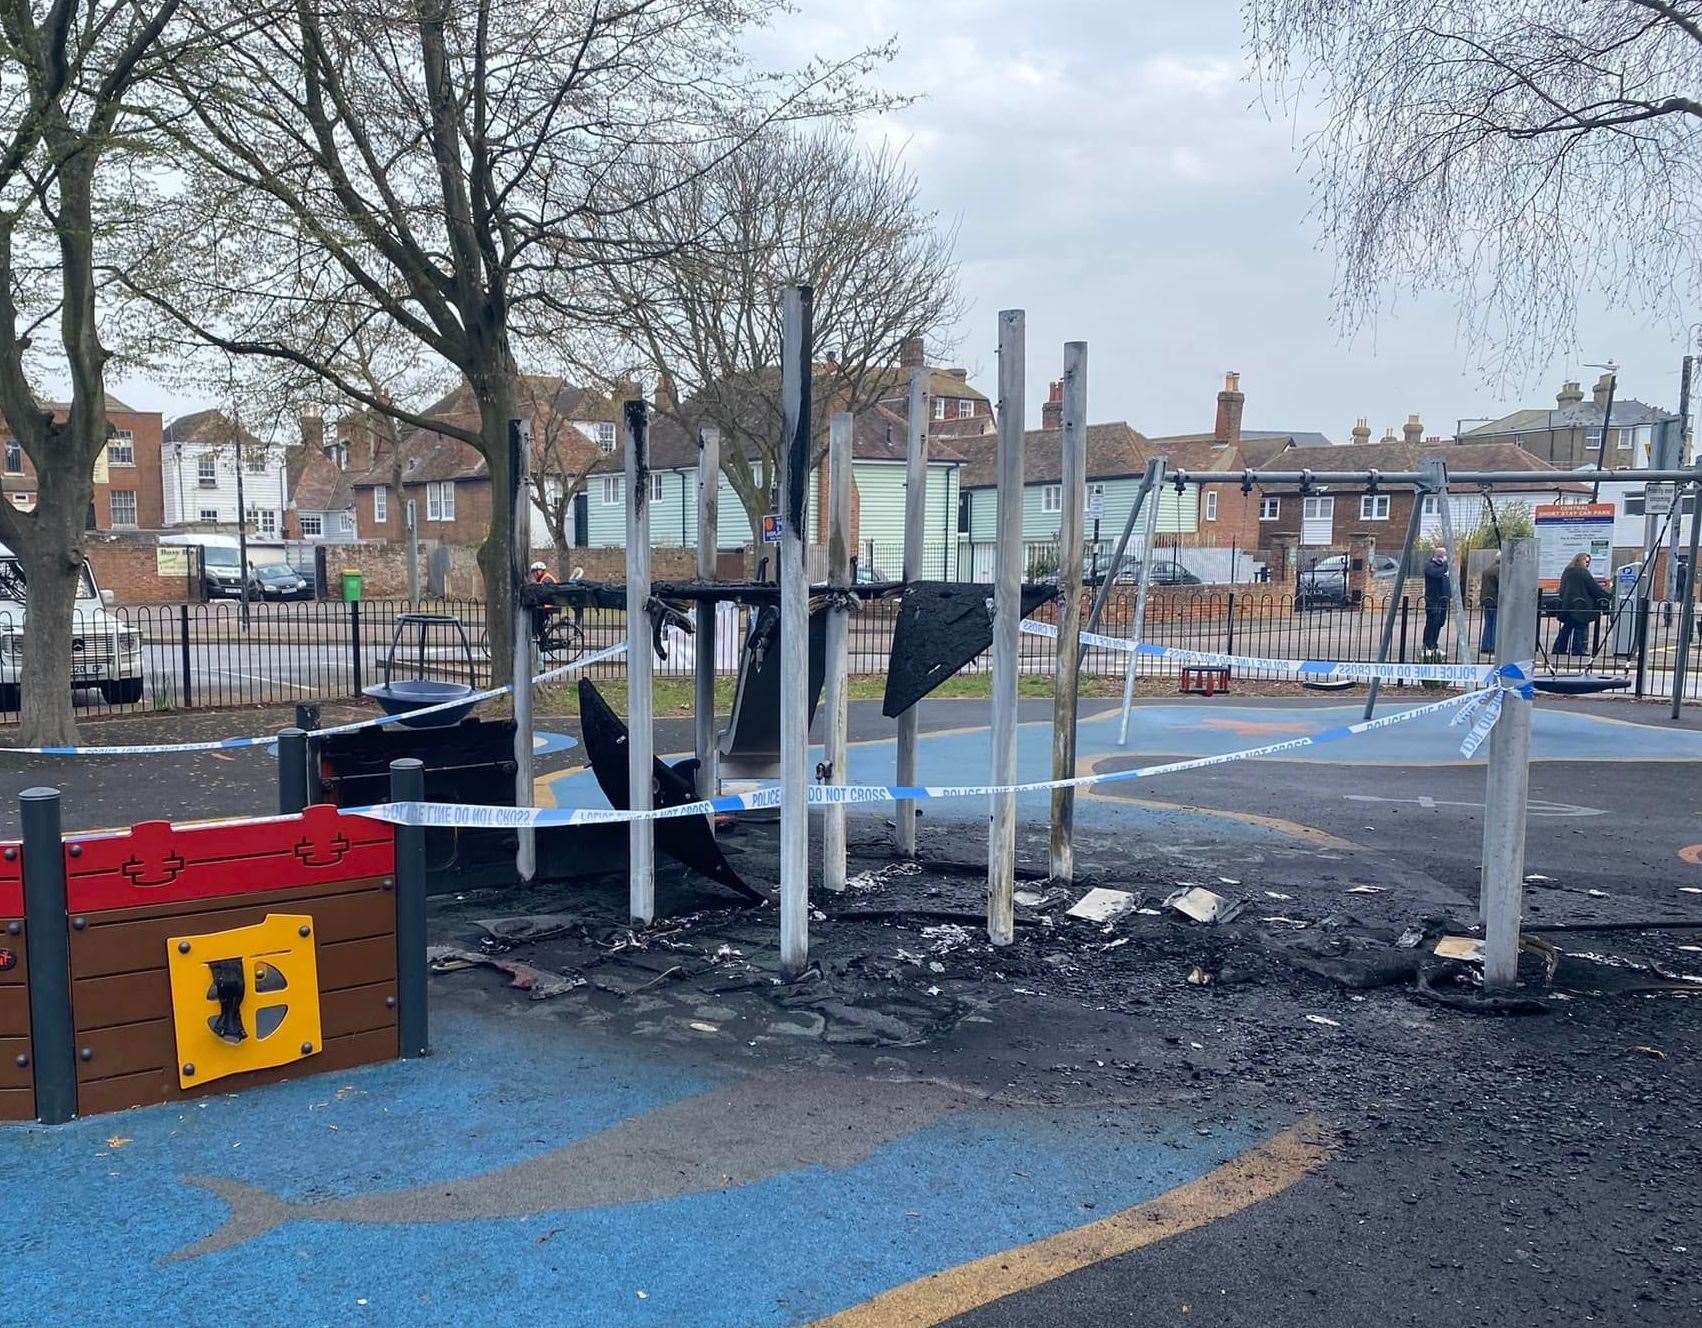 A piece of play equipment was burned to the ground in the early hours. Picture: Faversham Pools